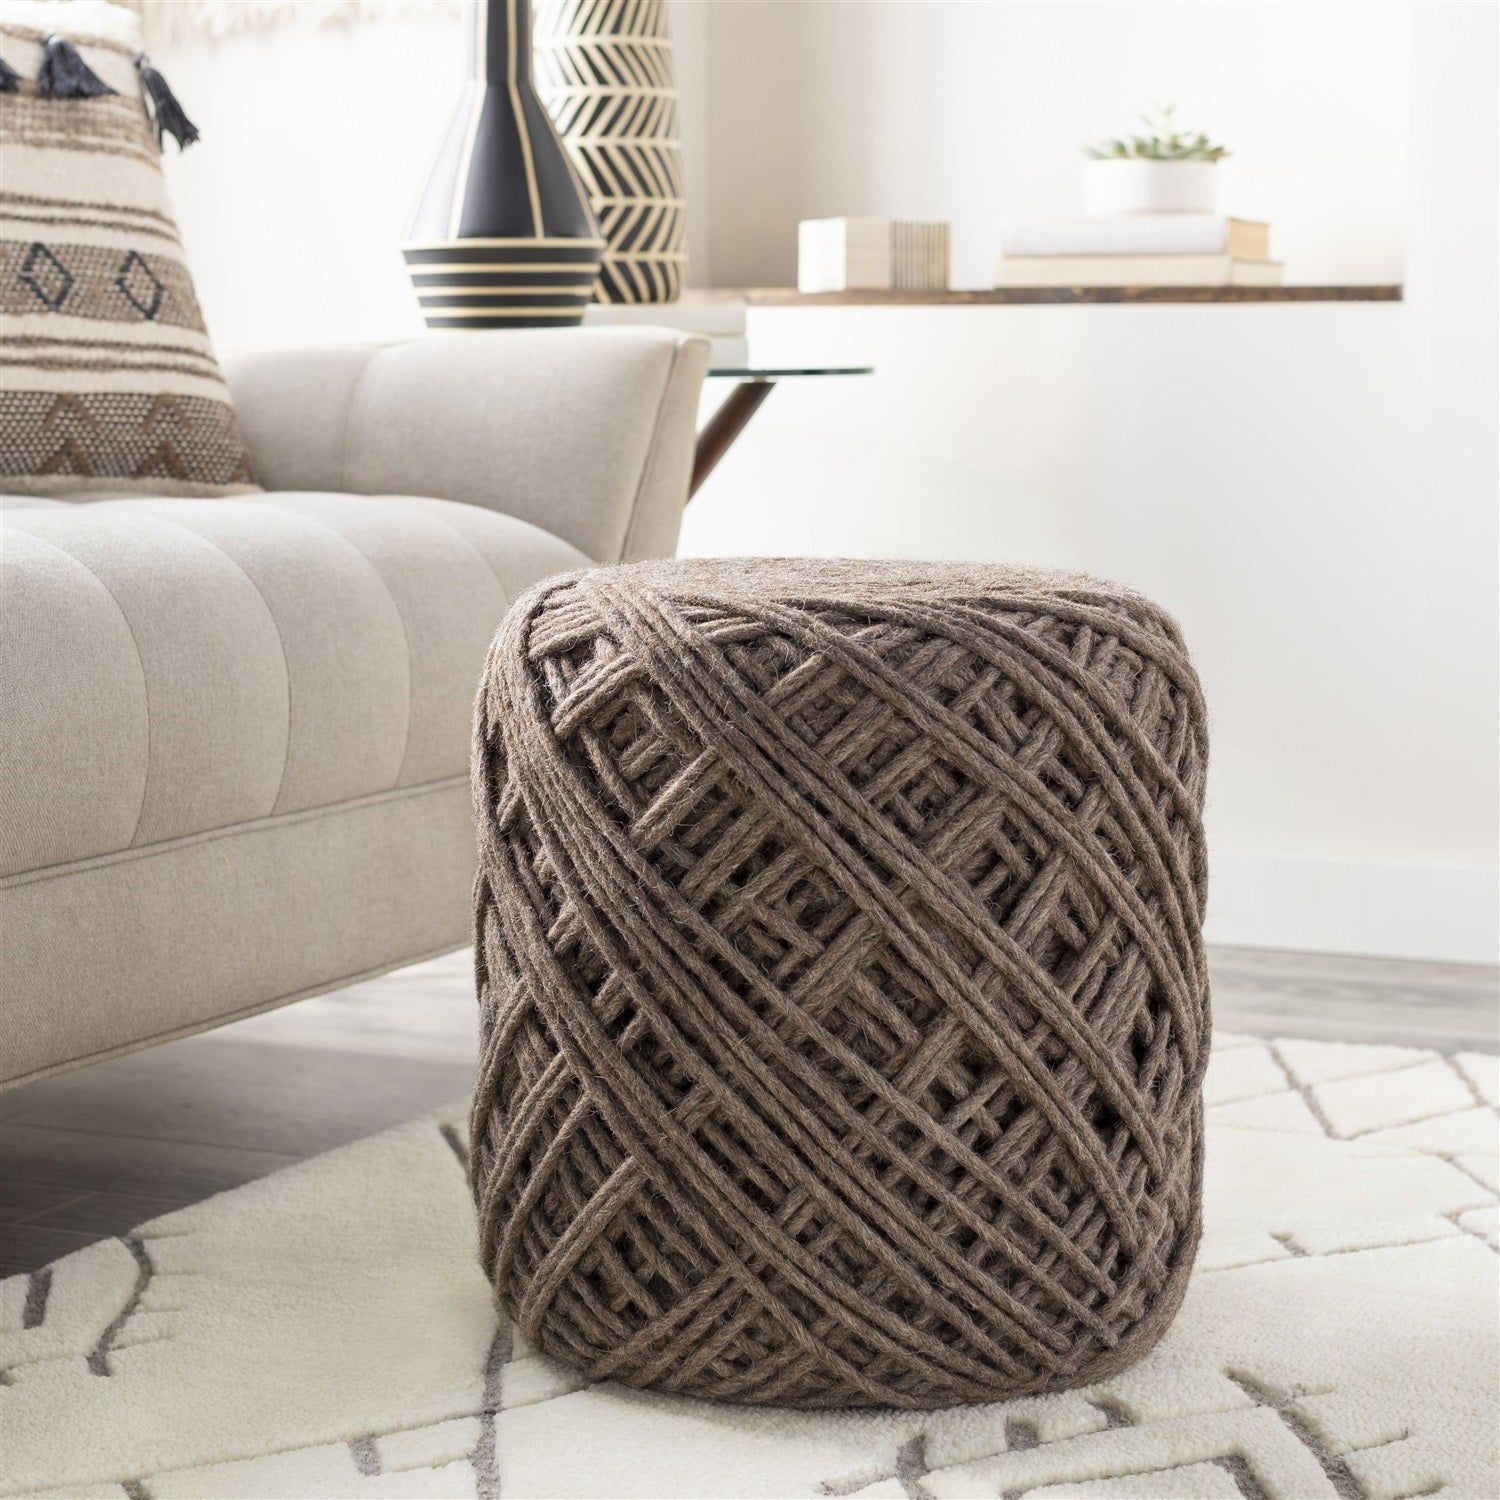 Modern Xap Cylinder Handmade Wool Ottoman | How To Clean Pillows, Modern  Forms, Shabby Chic Material With Regard To Polyester Handwoven Ottomans (View 10 of 15)